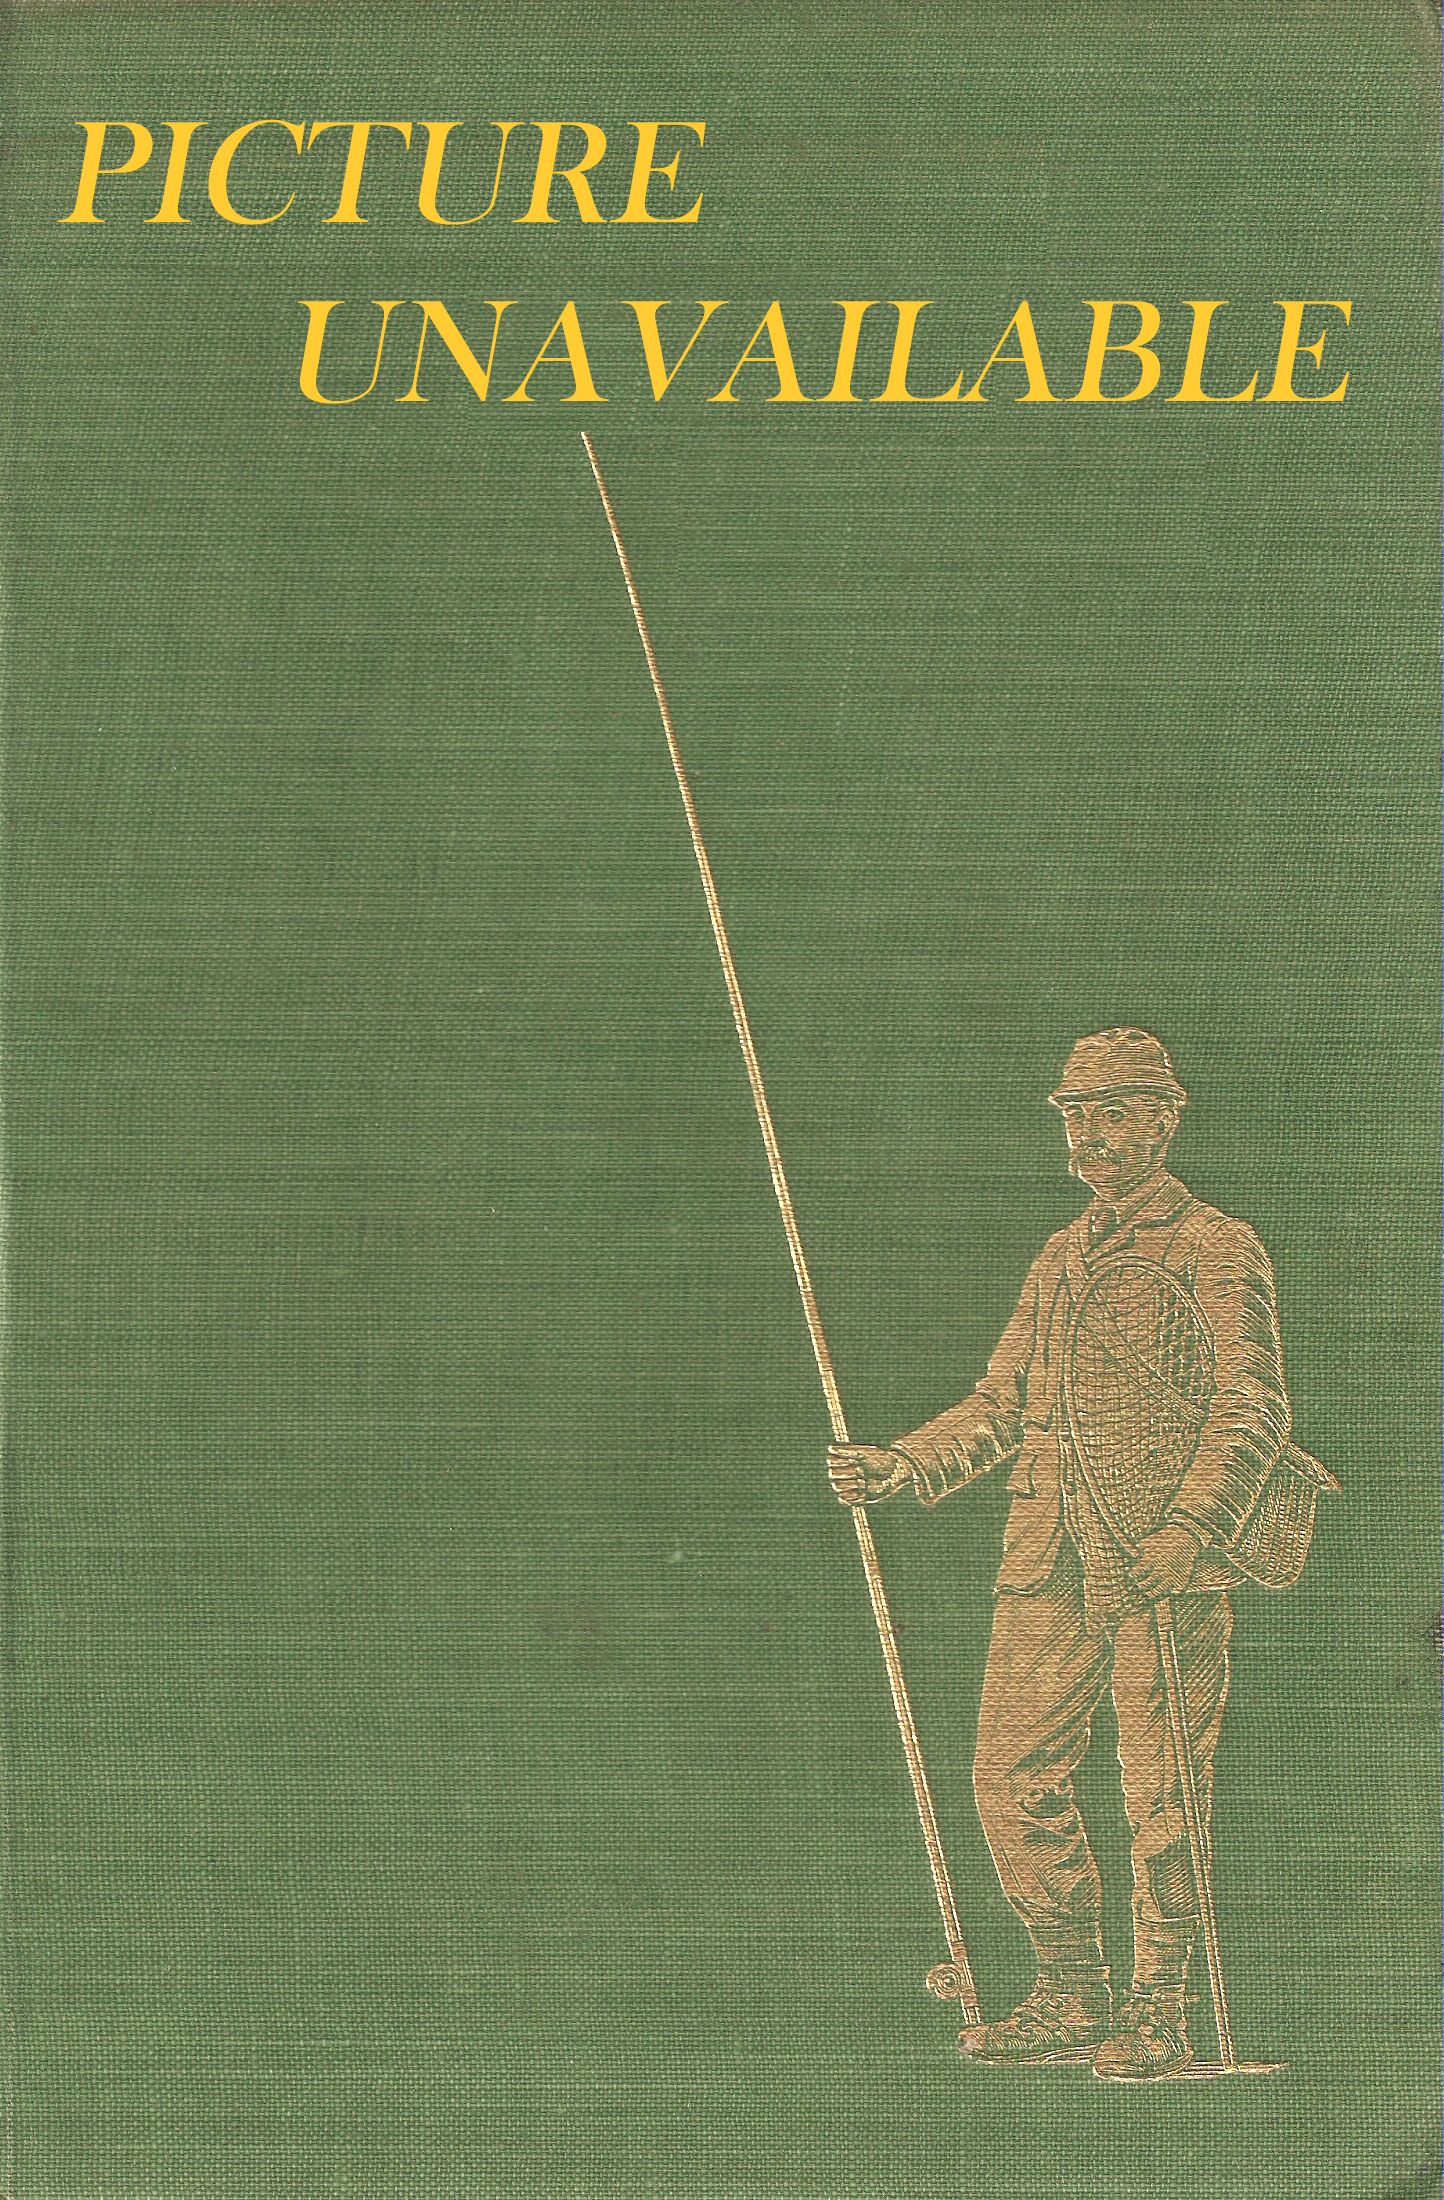 THE INCOMPLEAT ANGLER. AFTER MASTER IZAAK WALTON. Edited by F.C. Burnand  and illustrated by Harry Furniss.